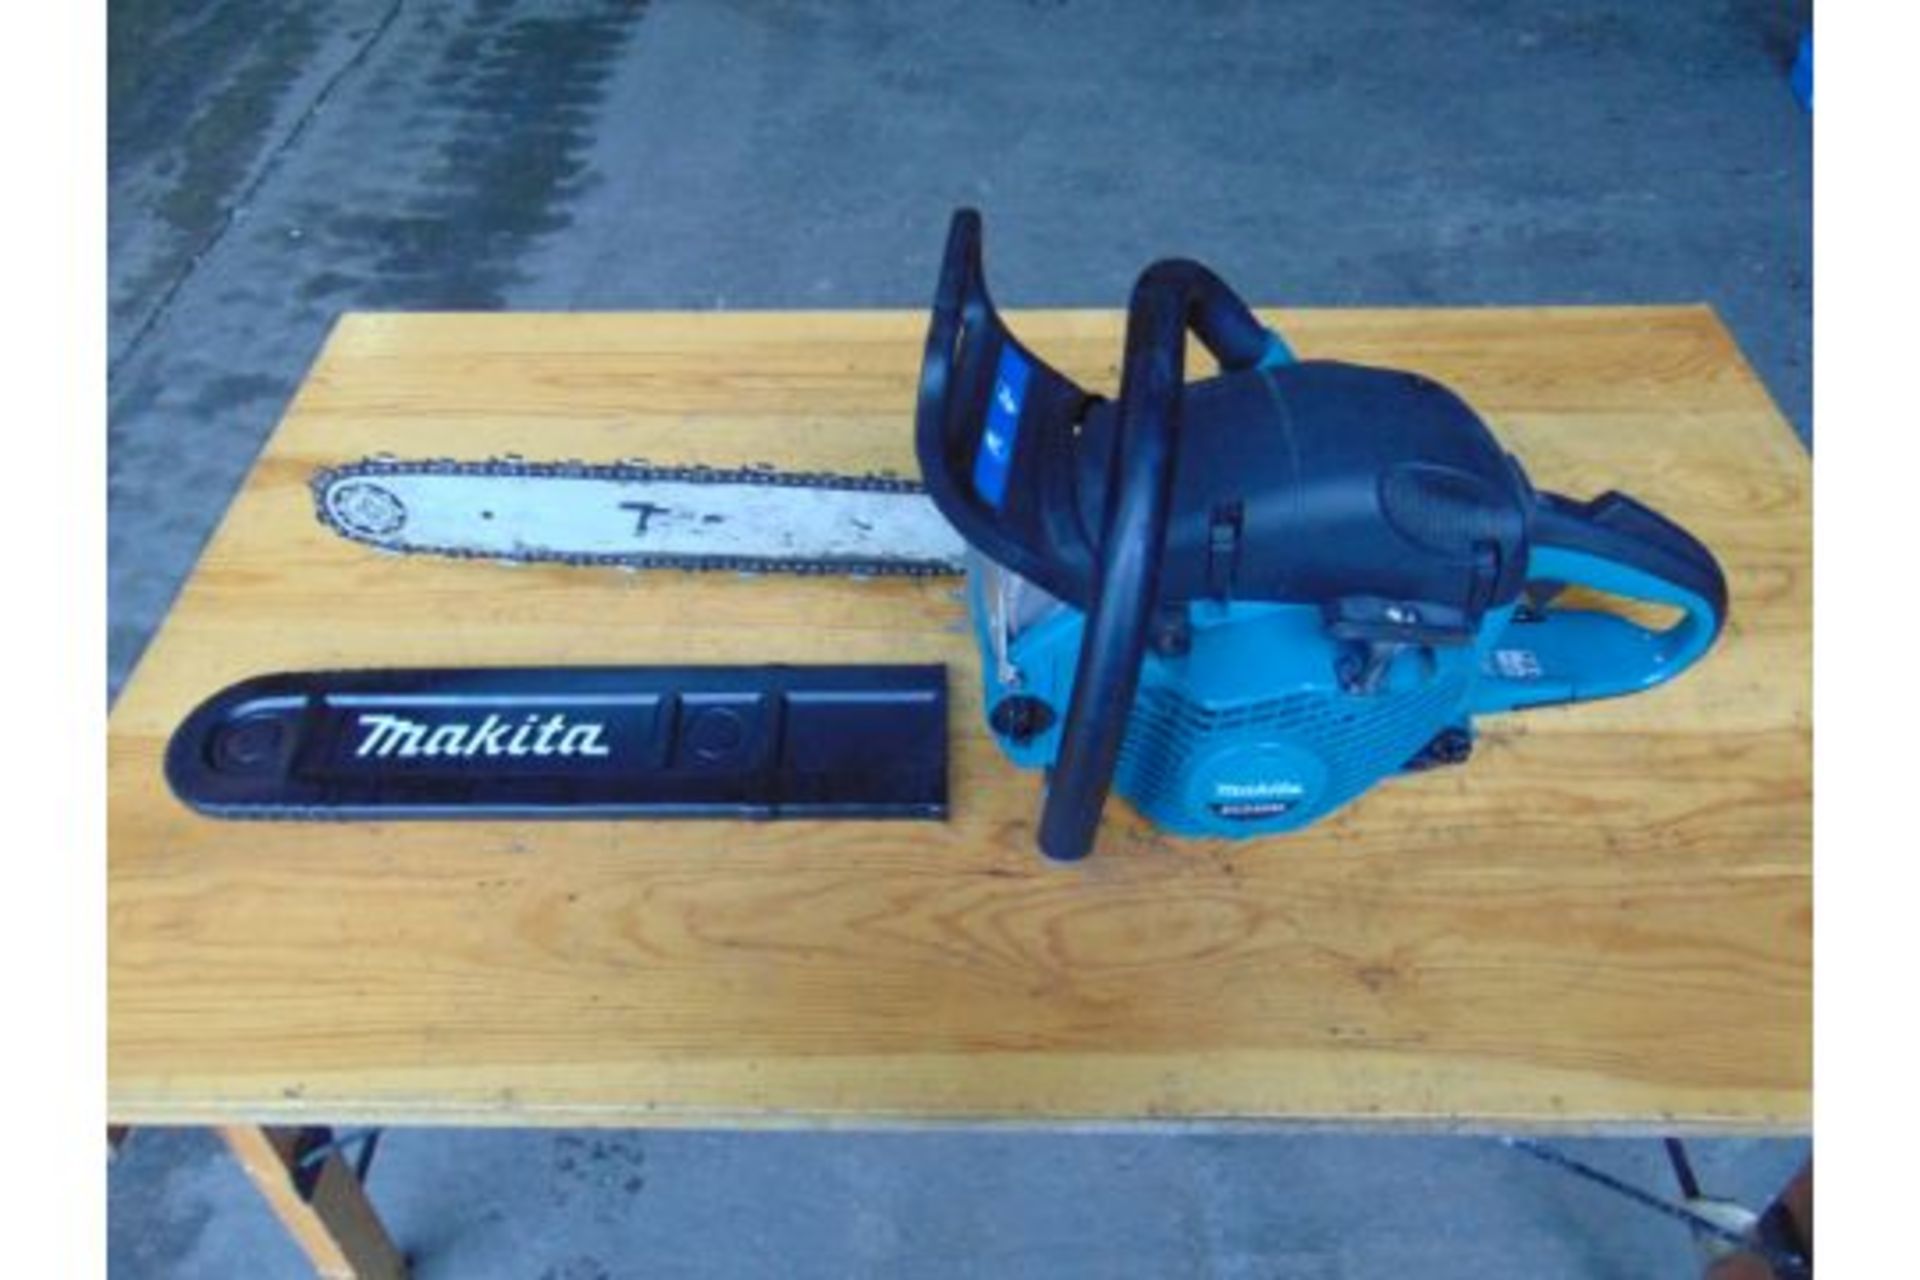 Makita DCS 5030 50CC Chainsaw c/w Chain Guard from MoD. - Image 4 of 5